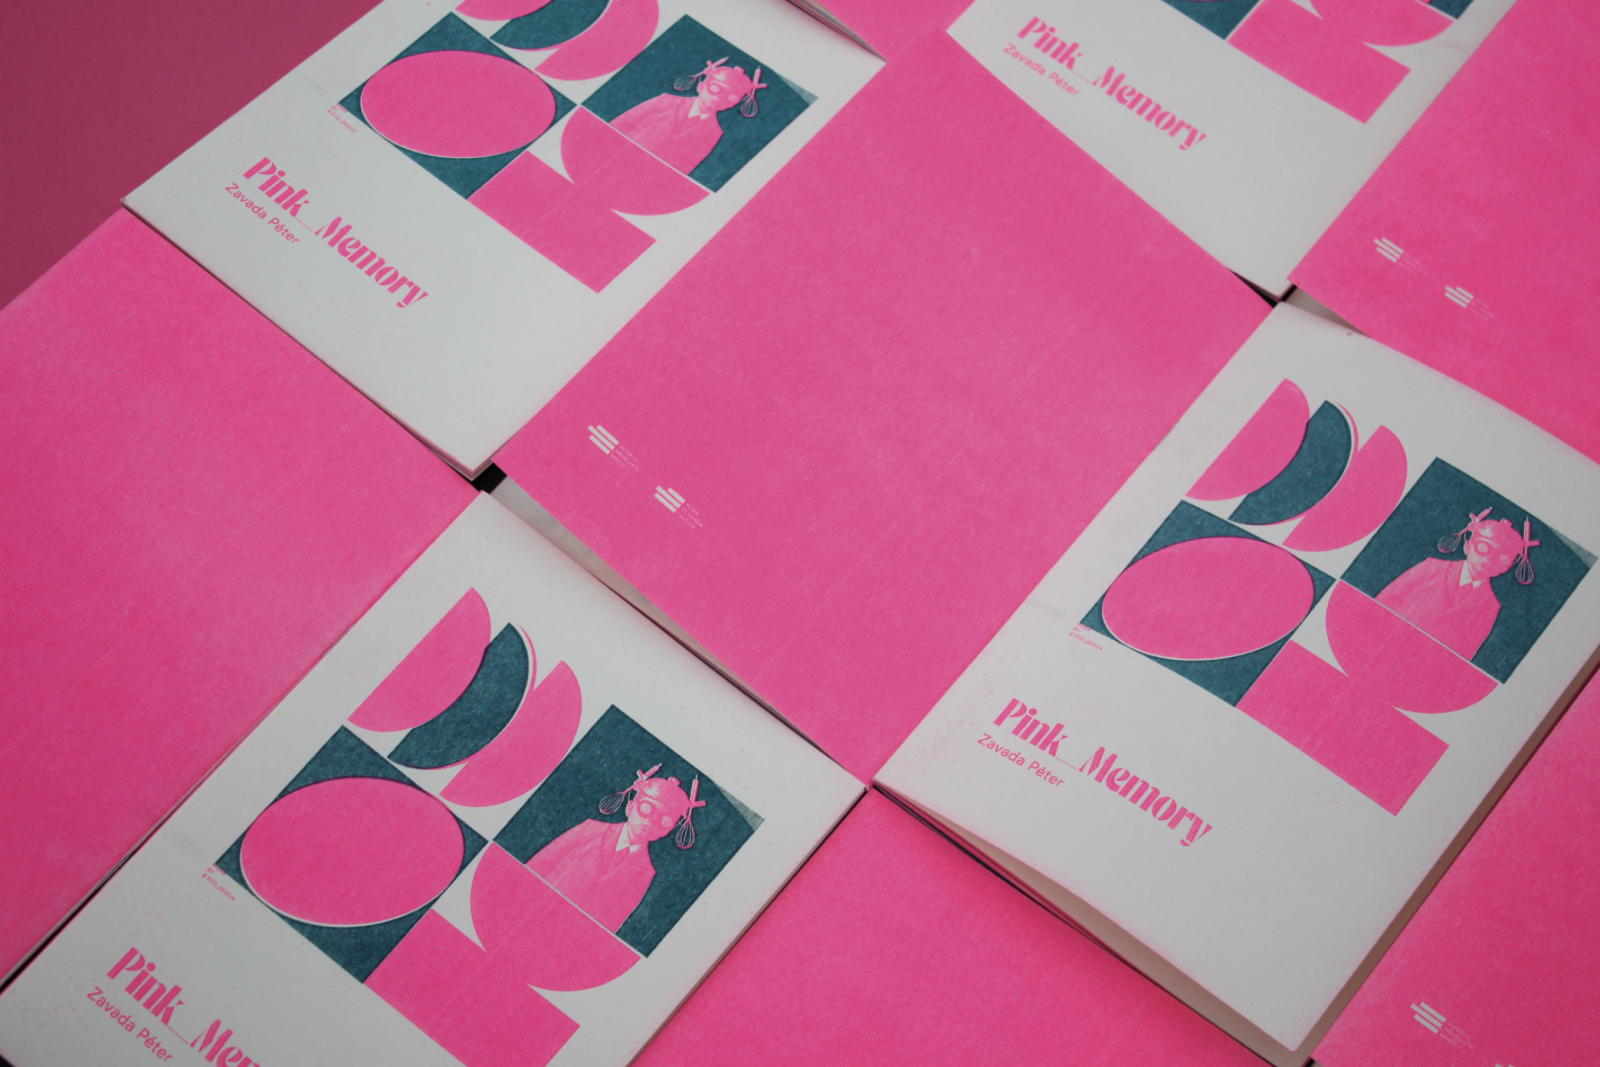 Risograph Publications by the Students of Visual Arts Institute Hungary